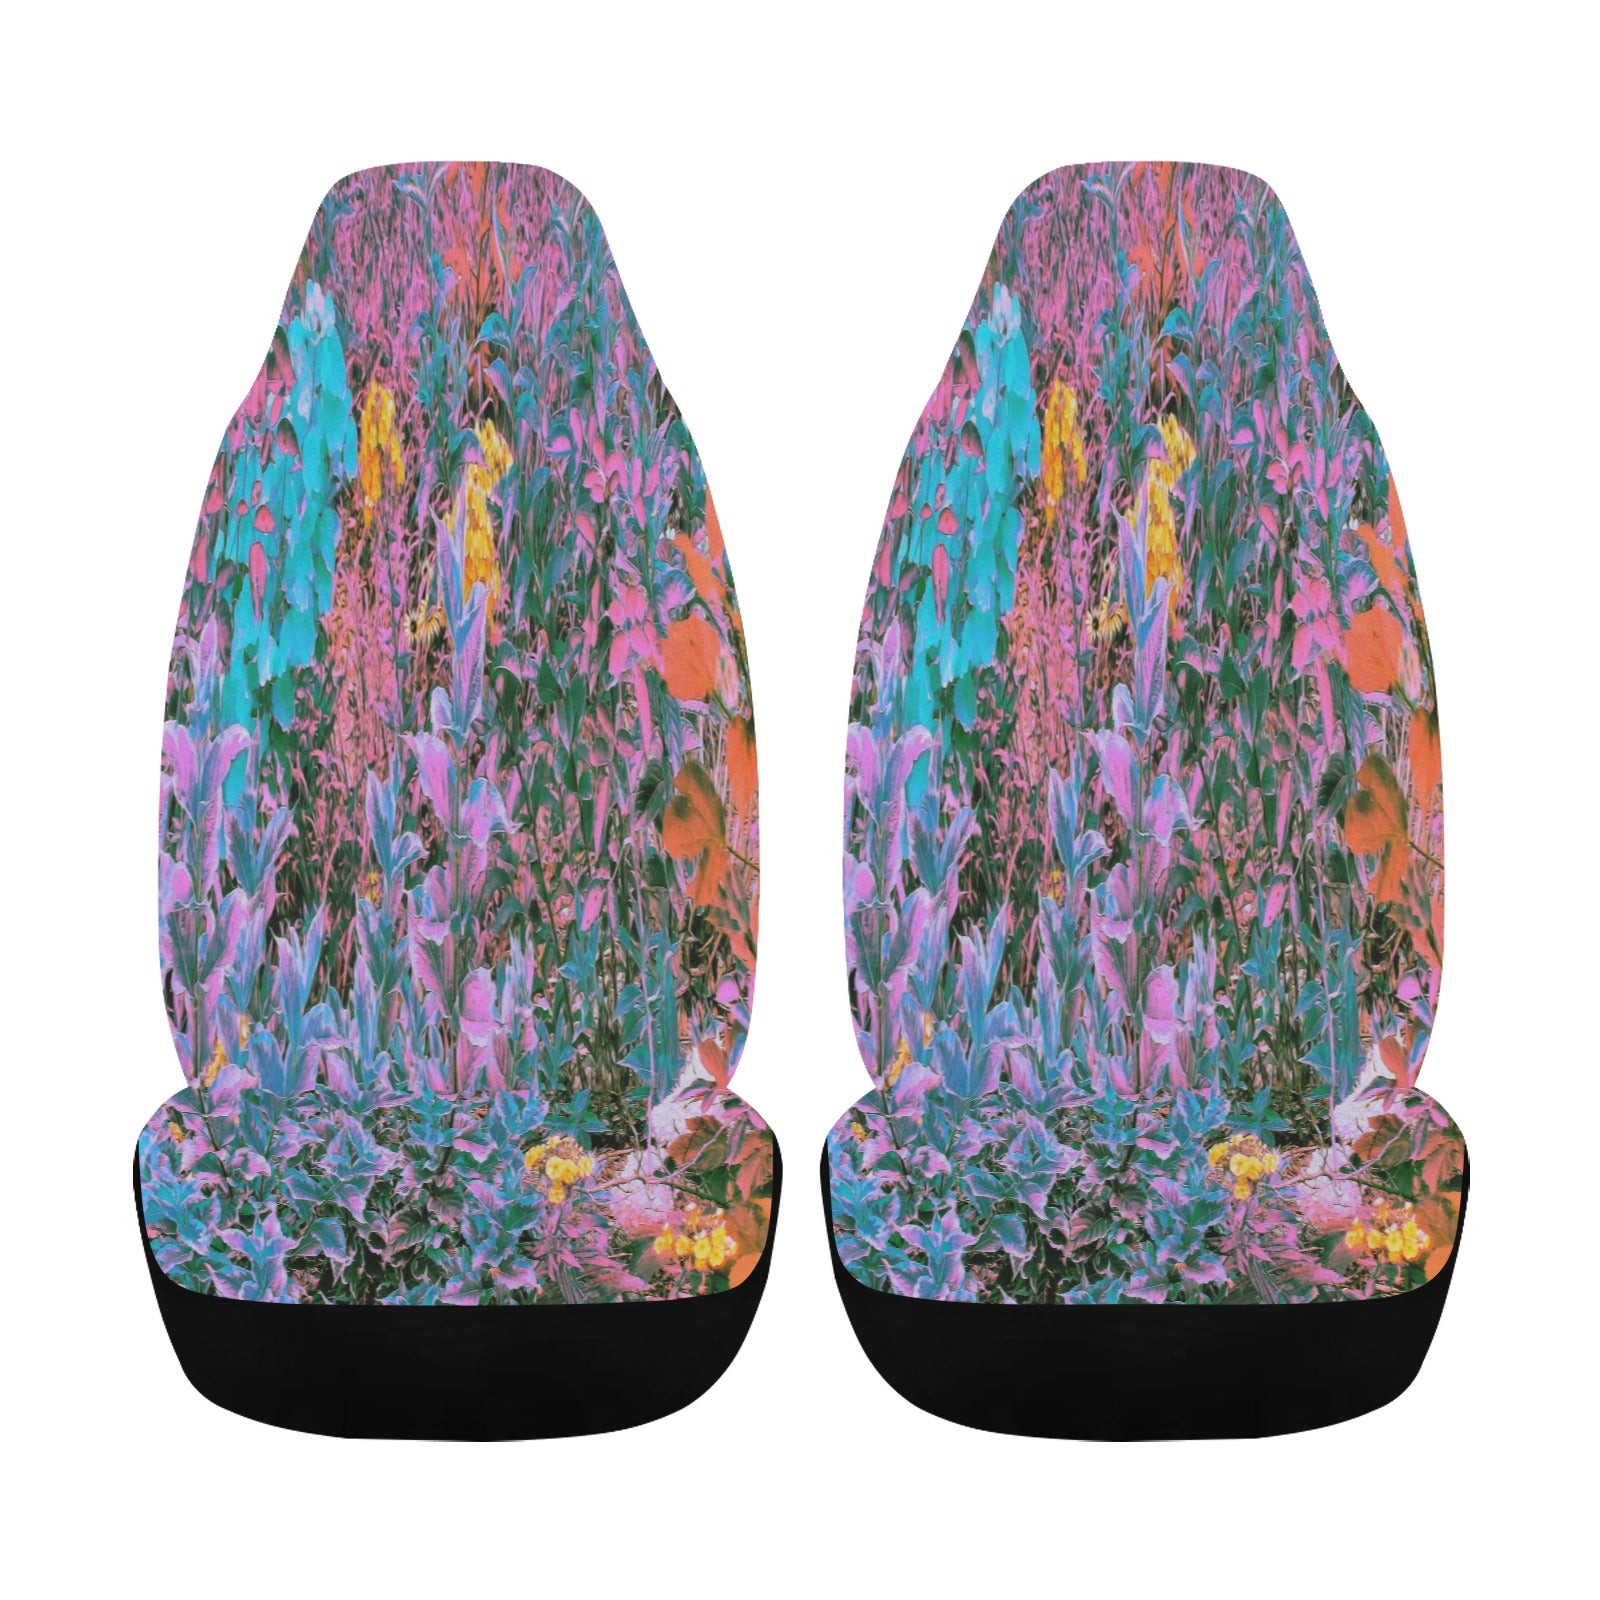 Car Seat Covers, Abstract Coral, Pink, Green and Aqua Garden Foliage